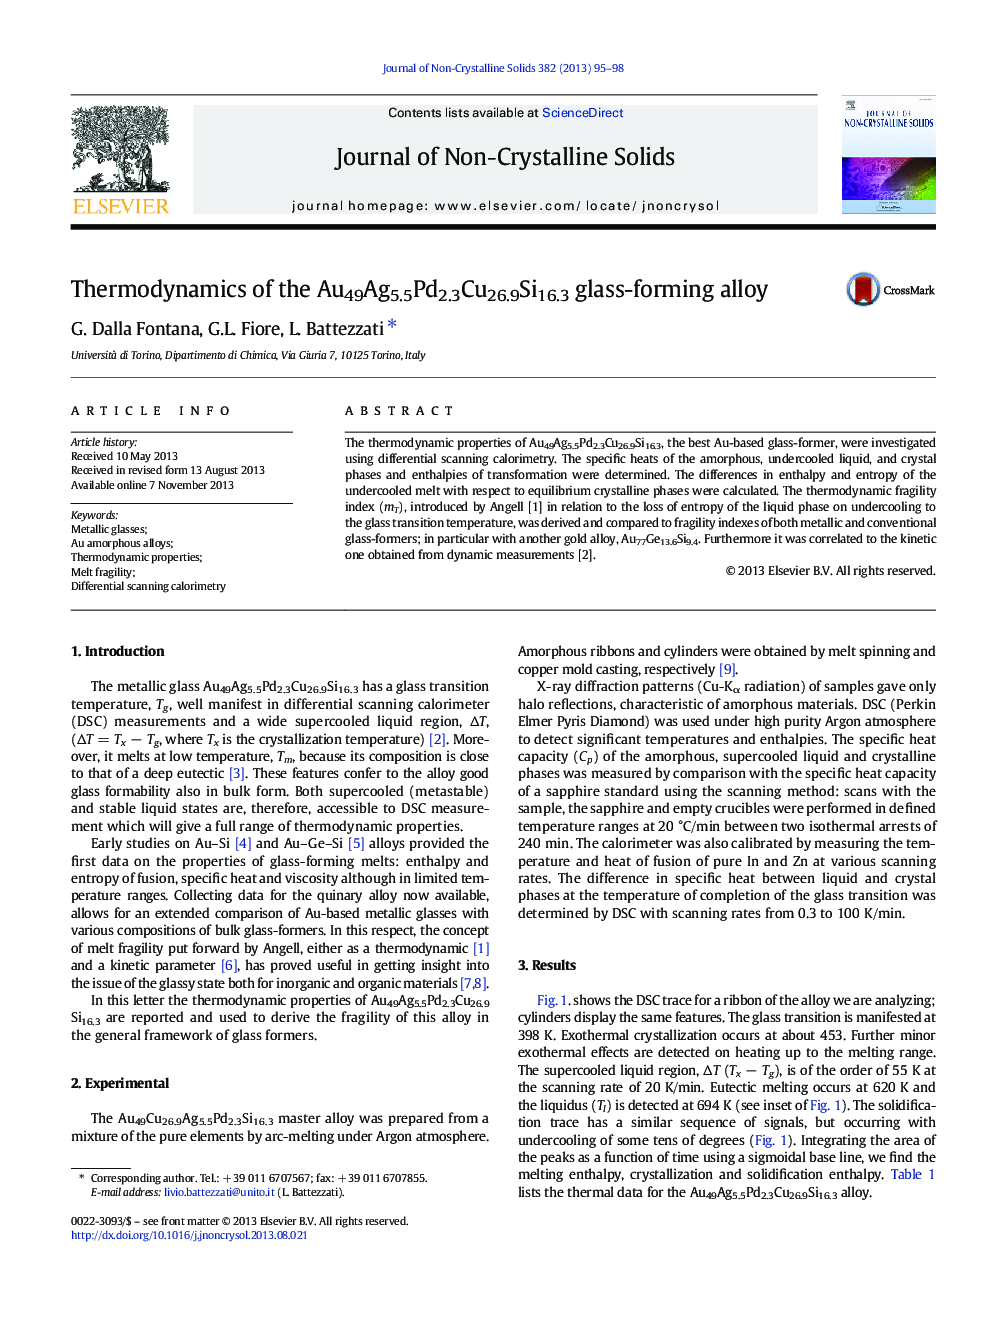 Thermodynamics of the Au49Ag5.5Pd2.3Cu26.9Si16.3 glass-forming alloy